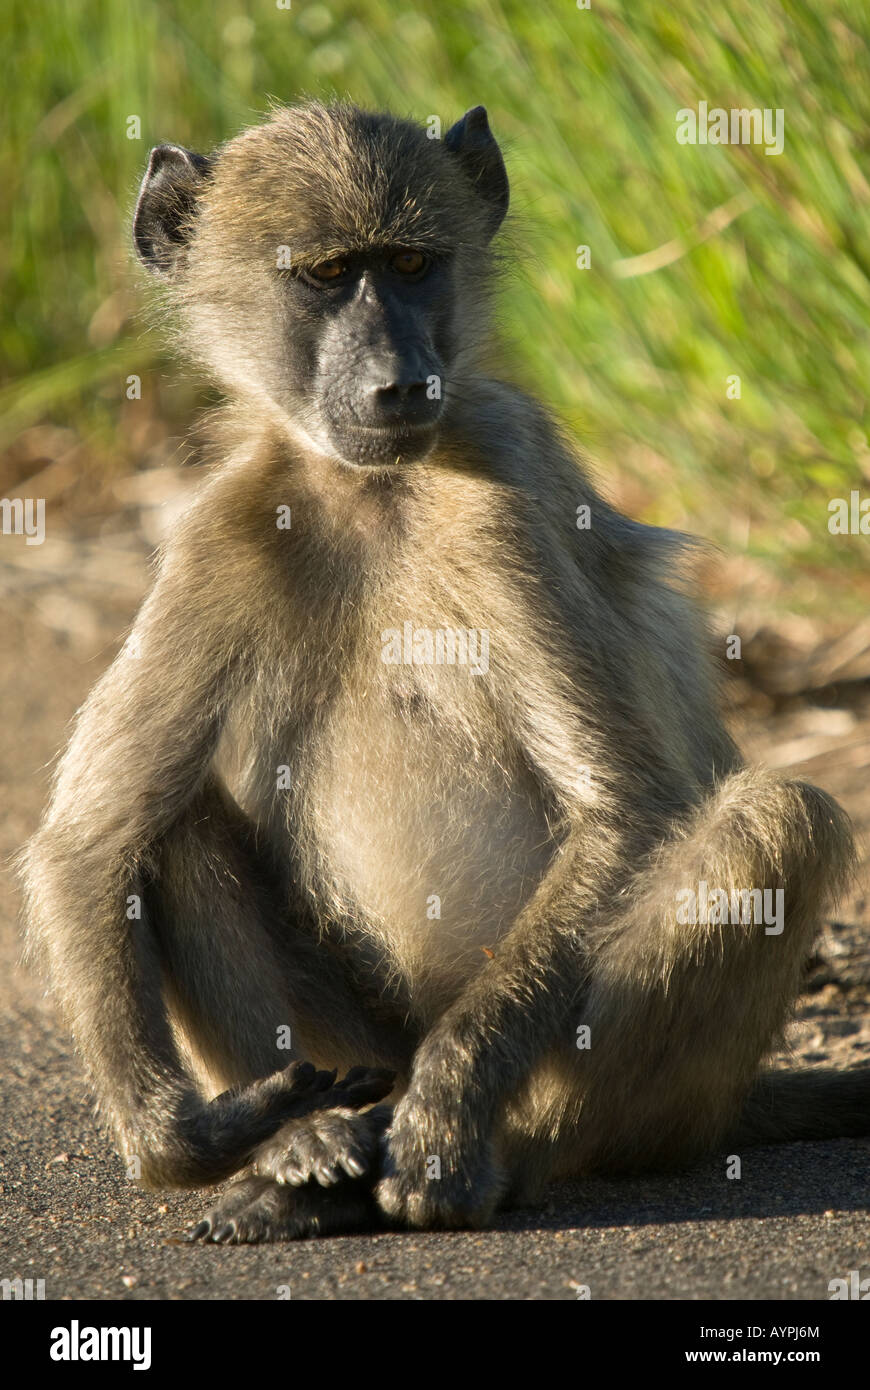 A young chacma baboon sitting on a tar road Stock Photo